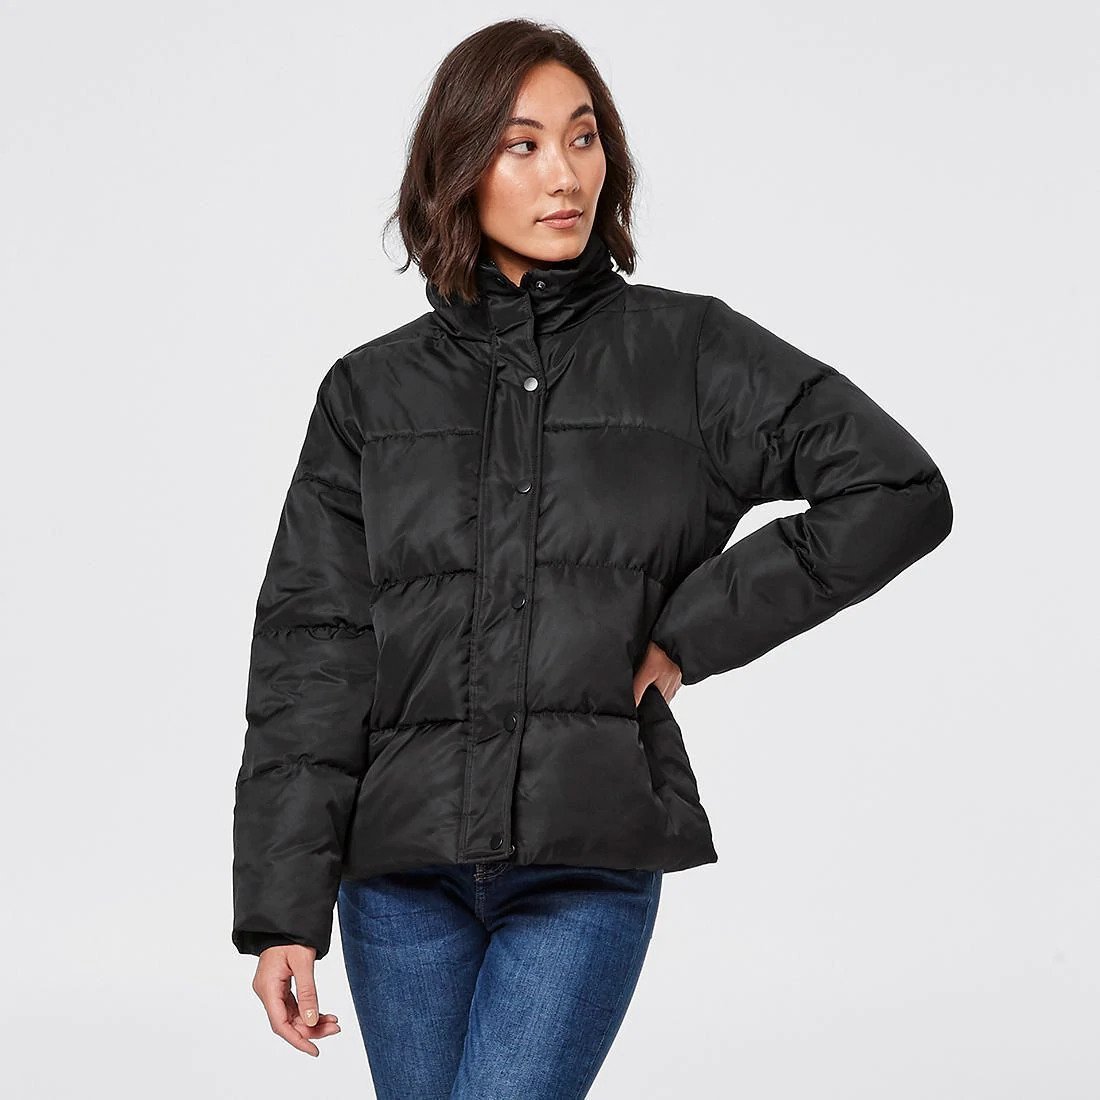 Affordable puffer jacket Australia: Our six favourite picks for 2020.